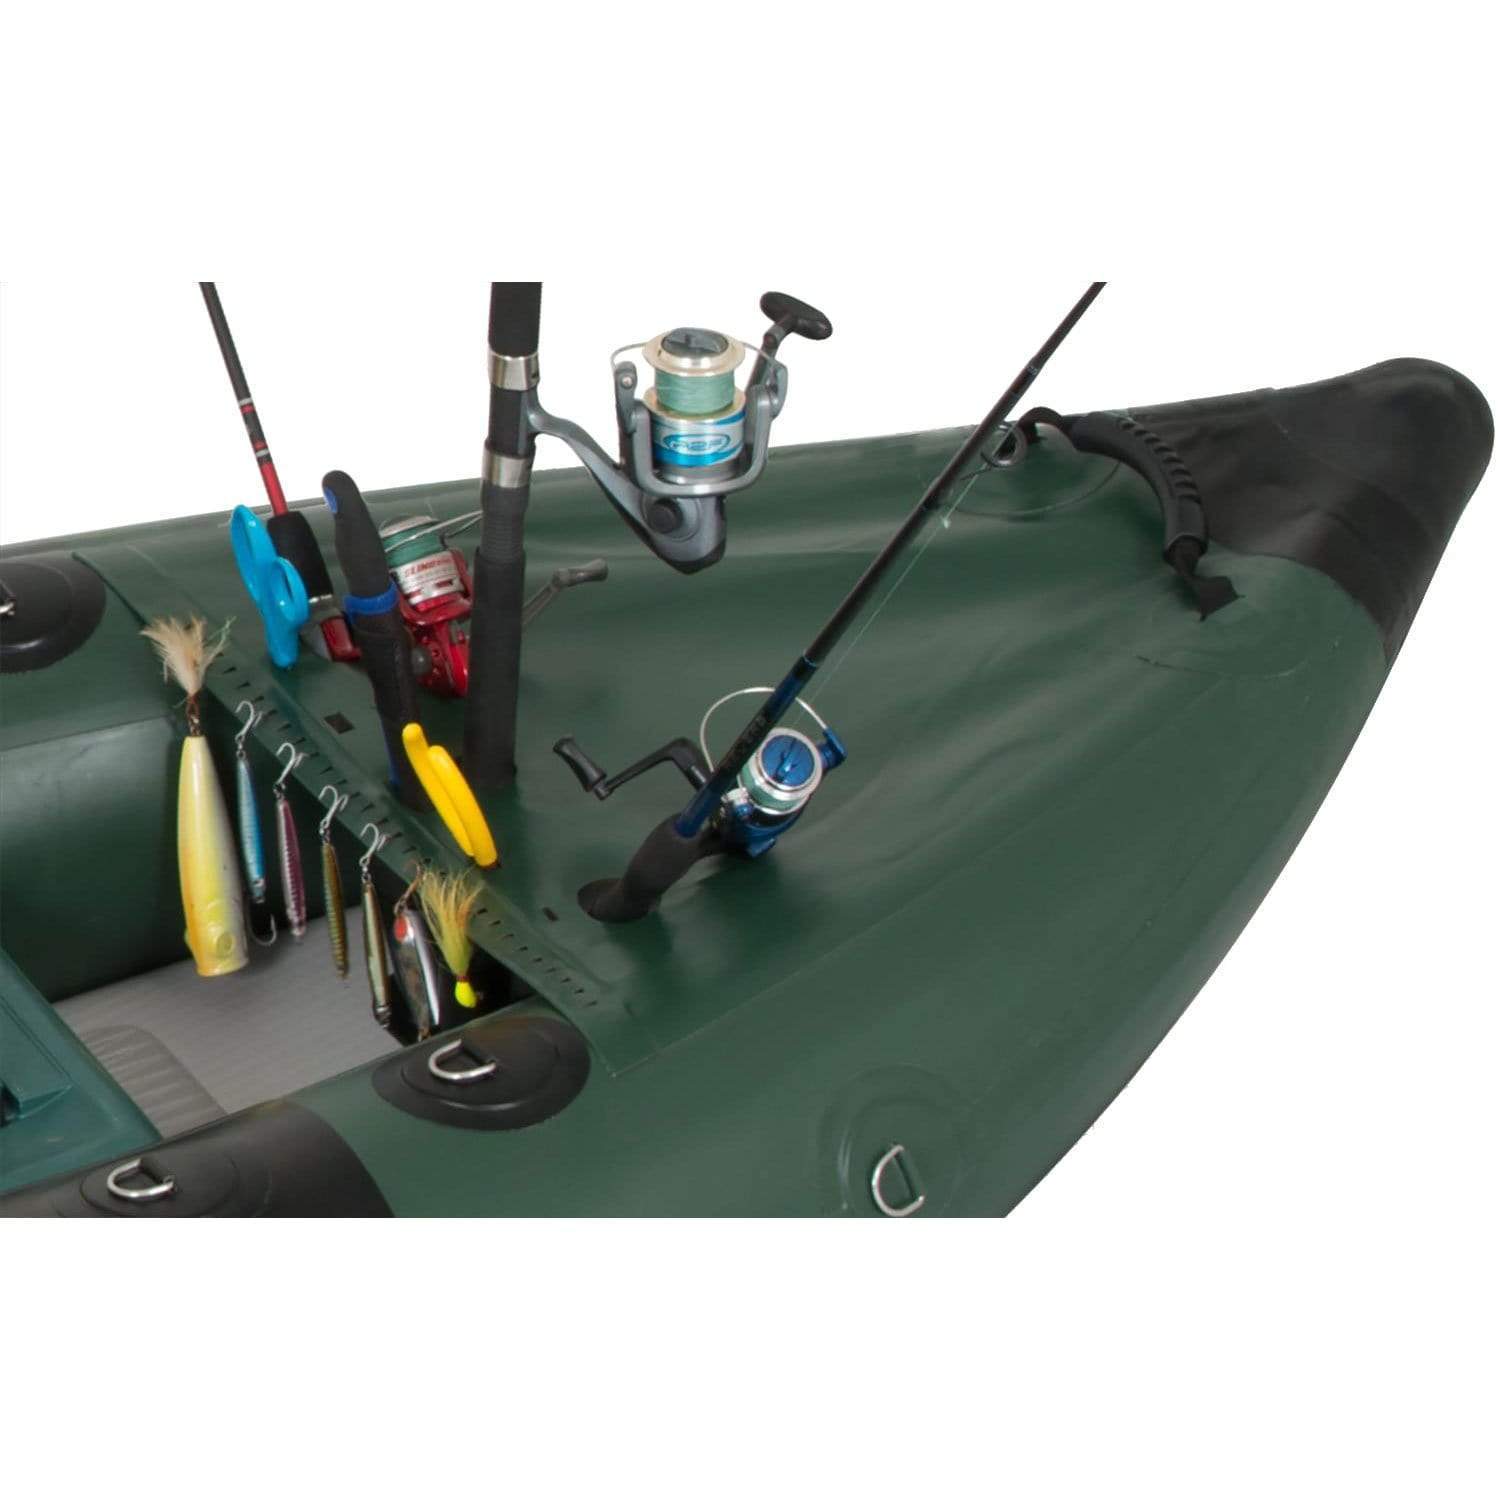 SeaEagle Inflatable Kayak Sea Eagle - 350FX One Person 11'6" Green Fishing Explorer Inflatable Fishing Boat Swivel Seat Fishing Rig Package ( 350FXK_FR )